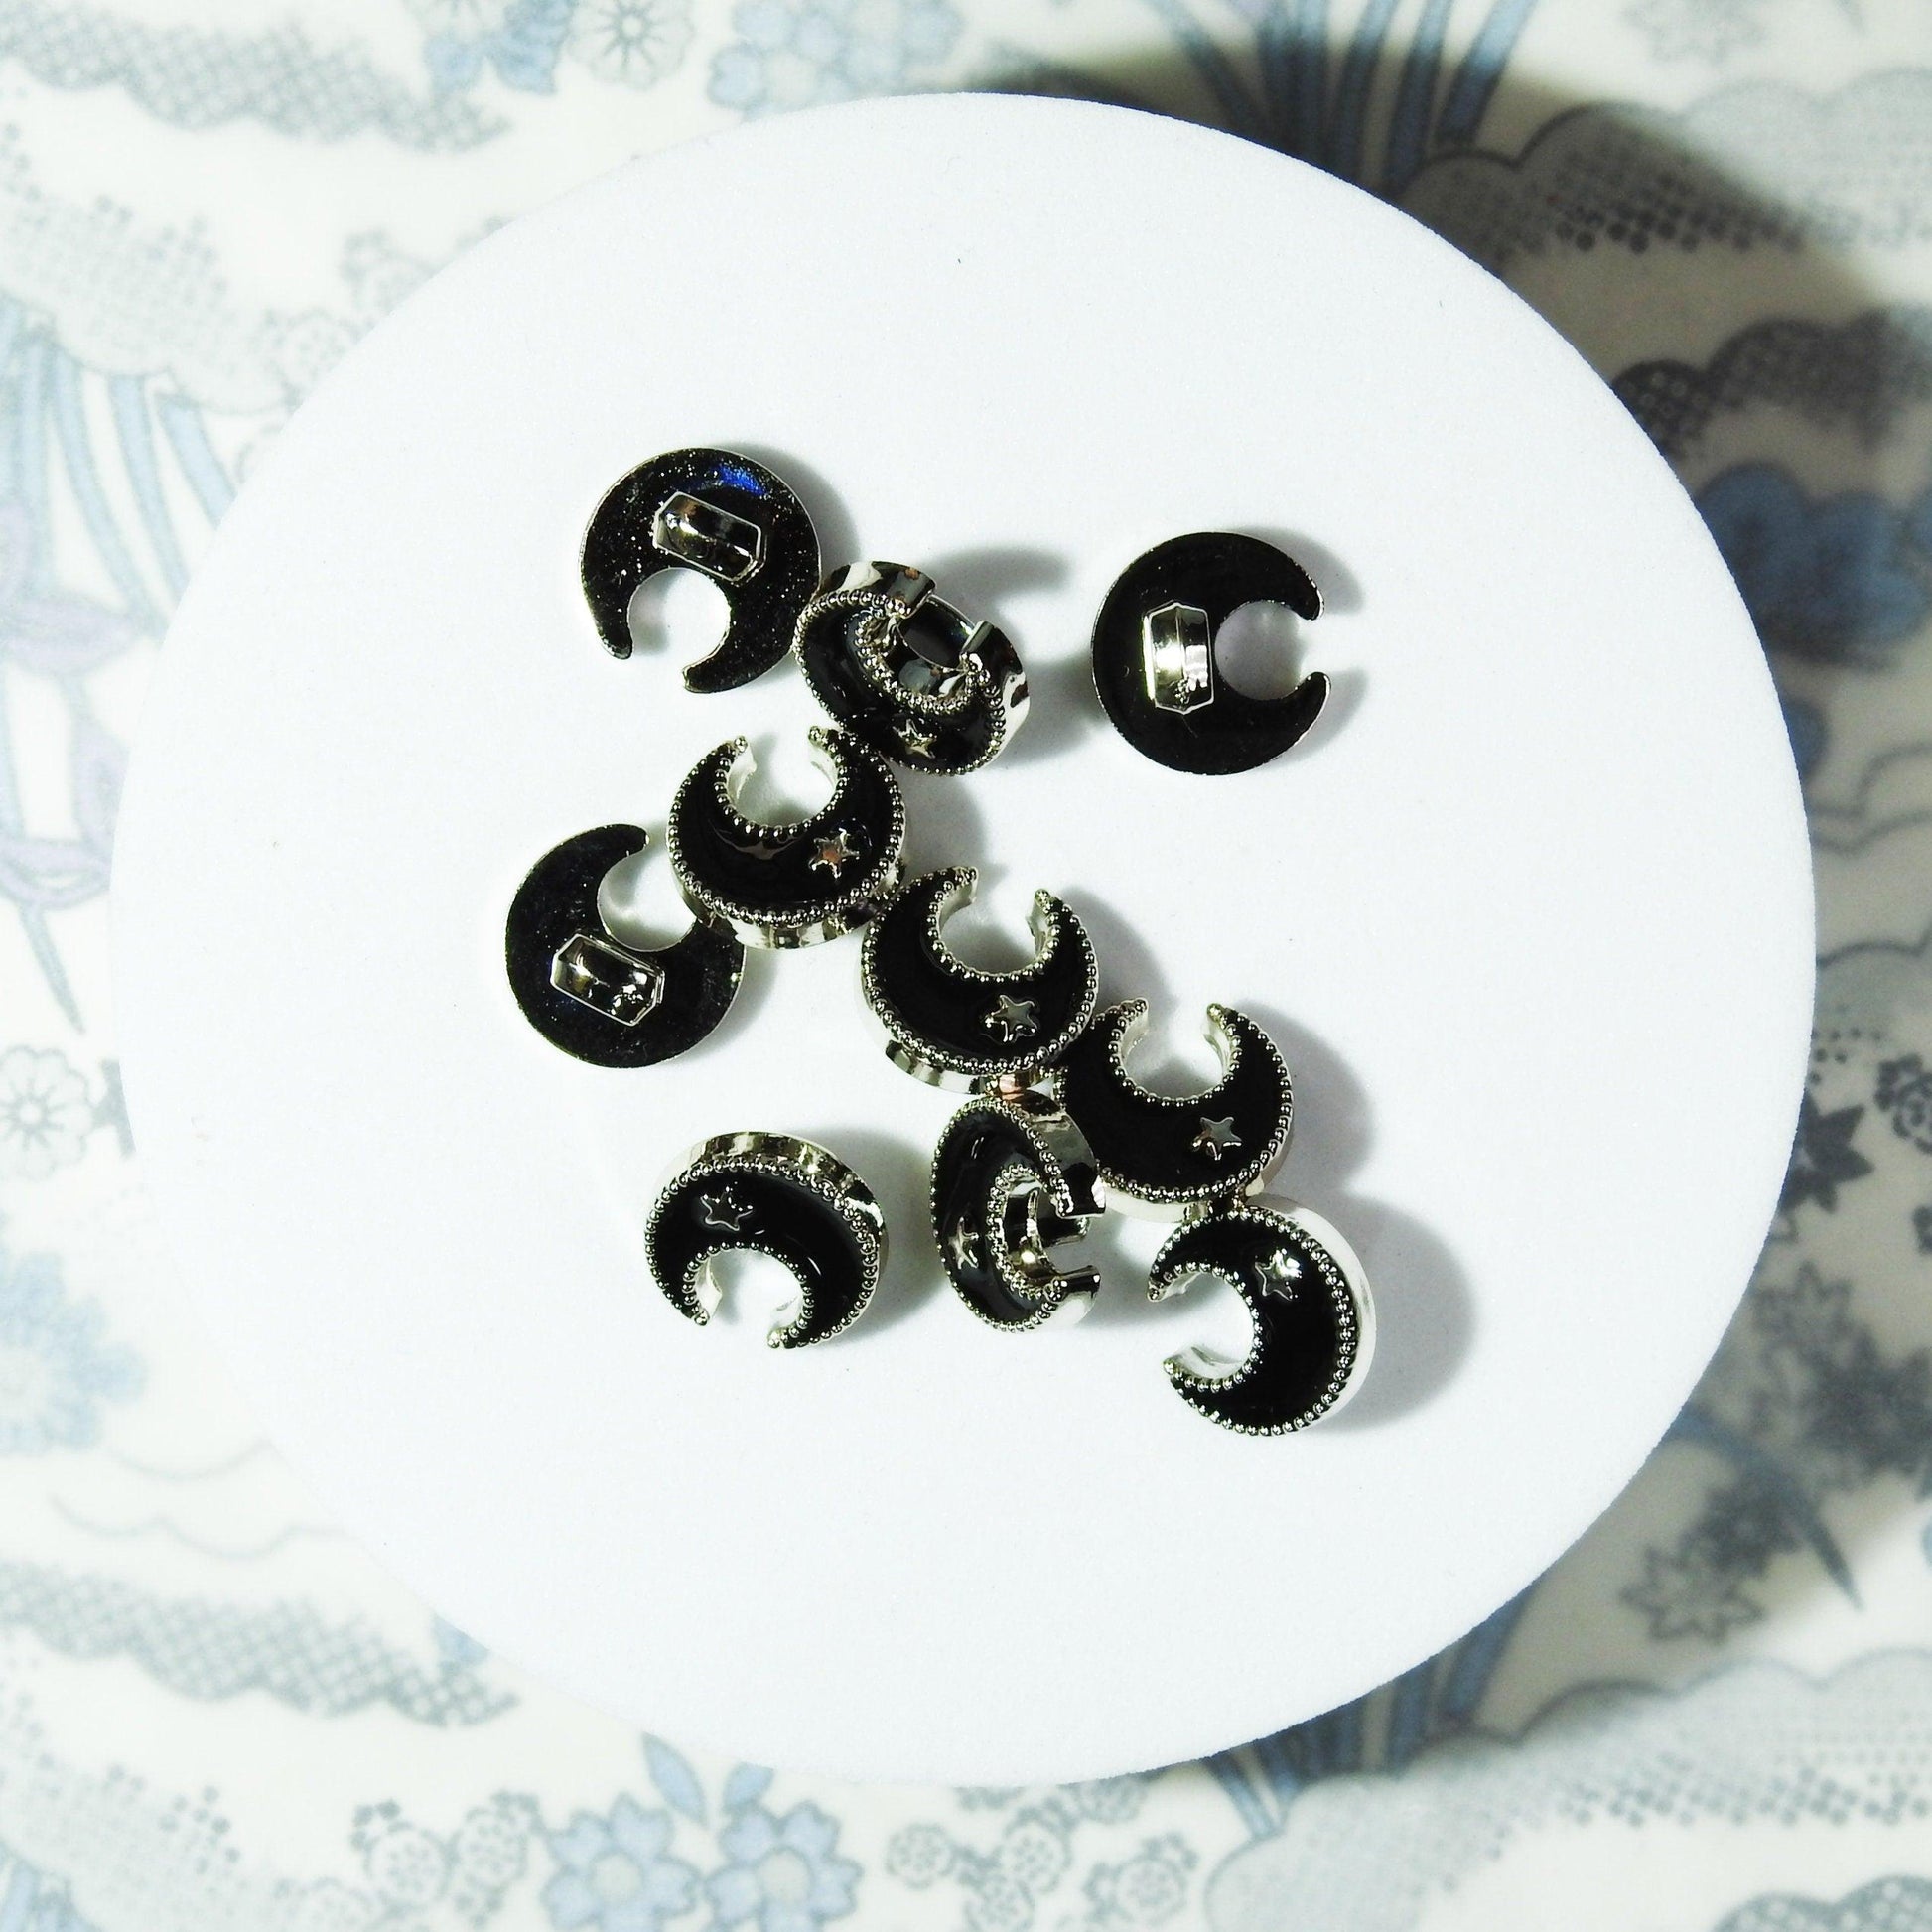 Sparkly bow-shaped buttons